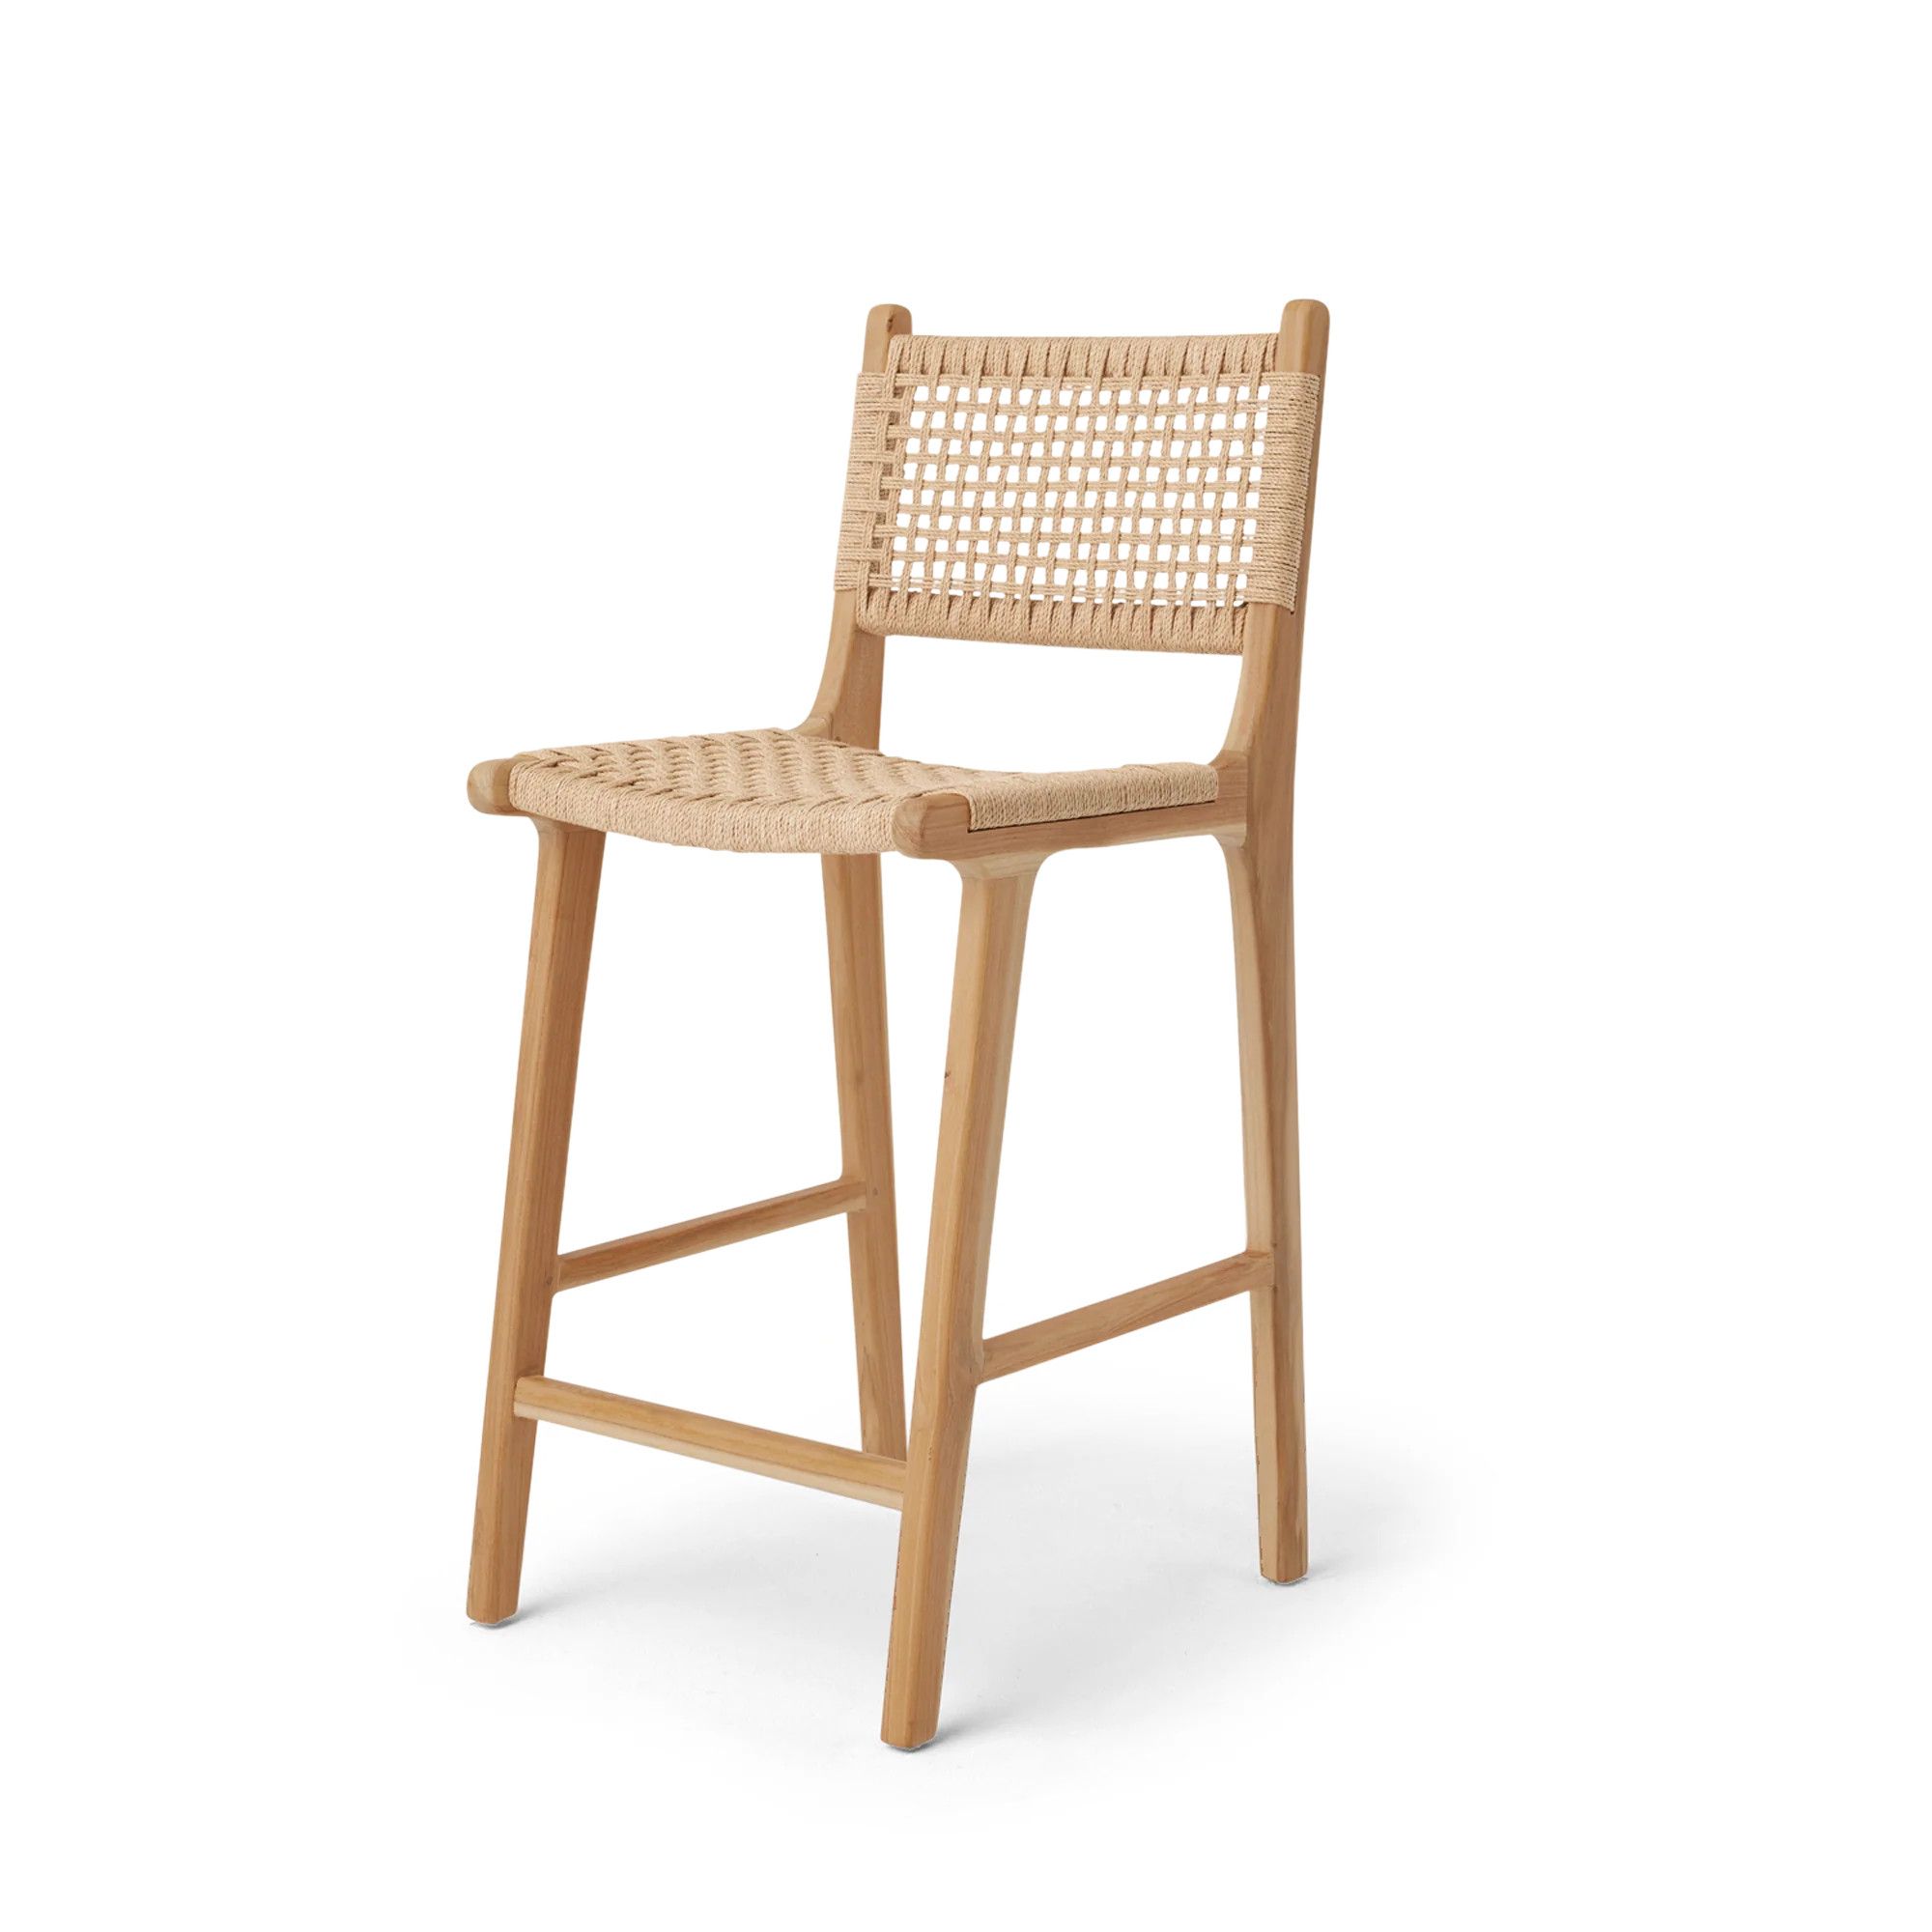 Stool #2 - Counter Stool in Teak with Paper Cord | Hati Home